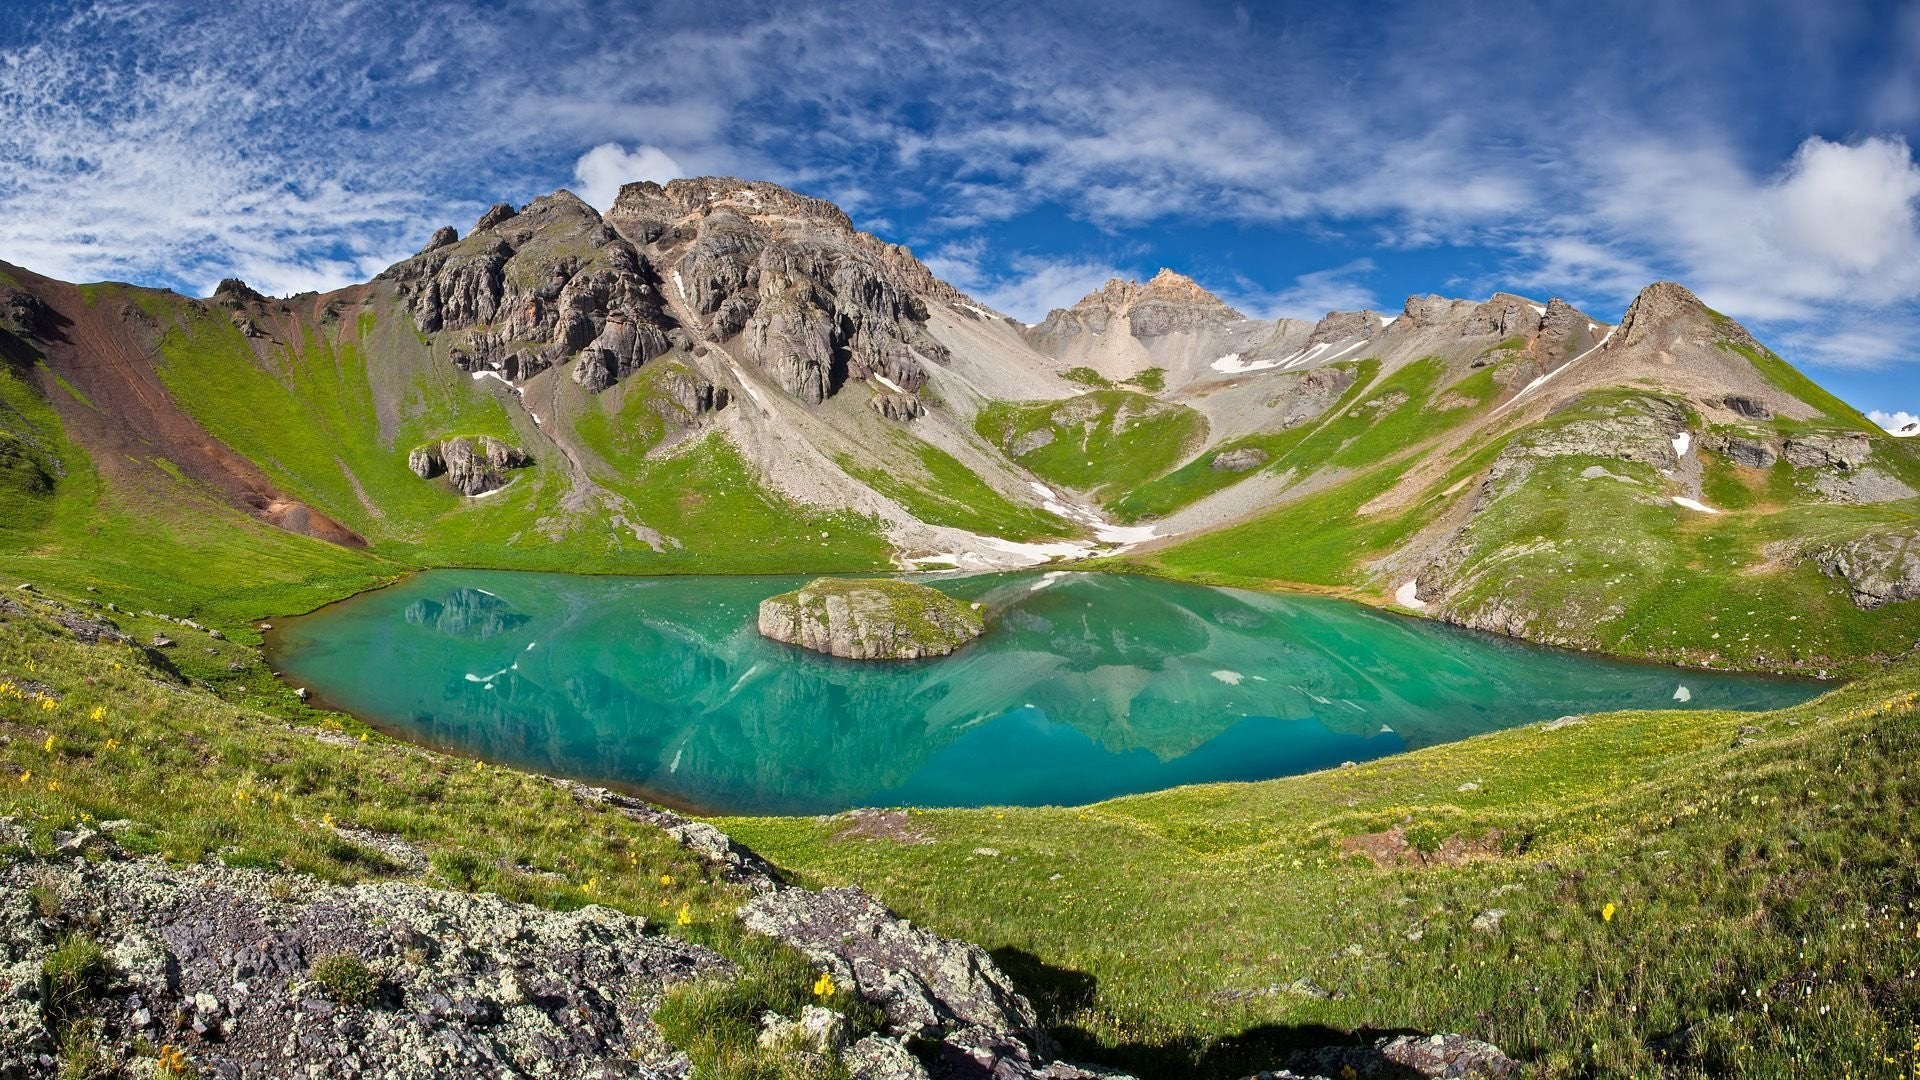 6 Amazing Hidden Lakes in Colorado You Probably Never Knew Existed